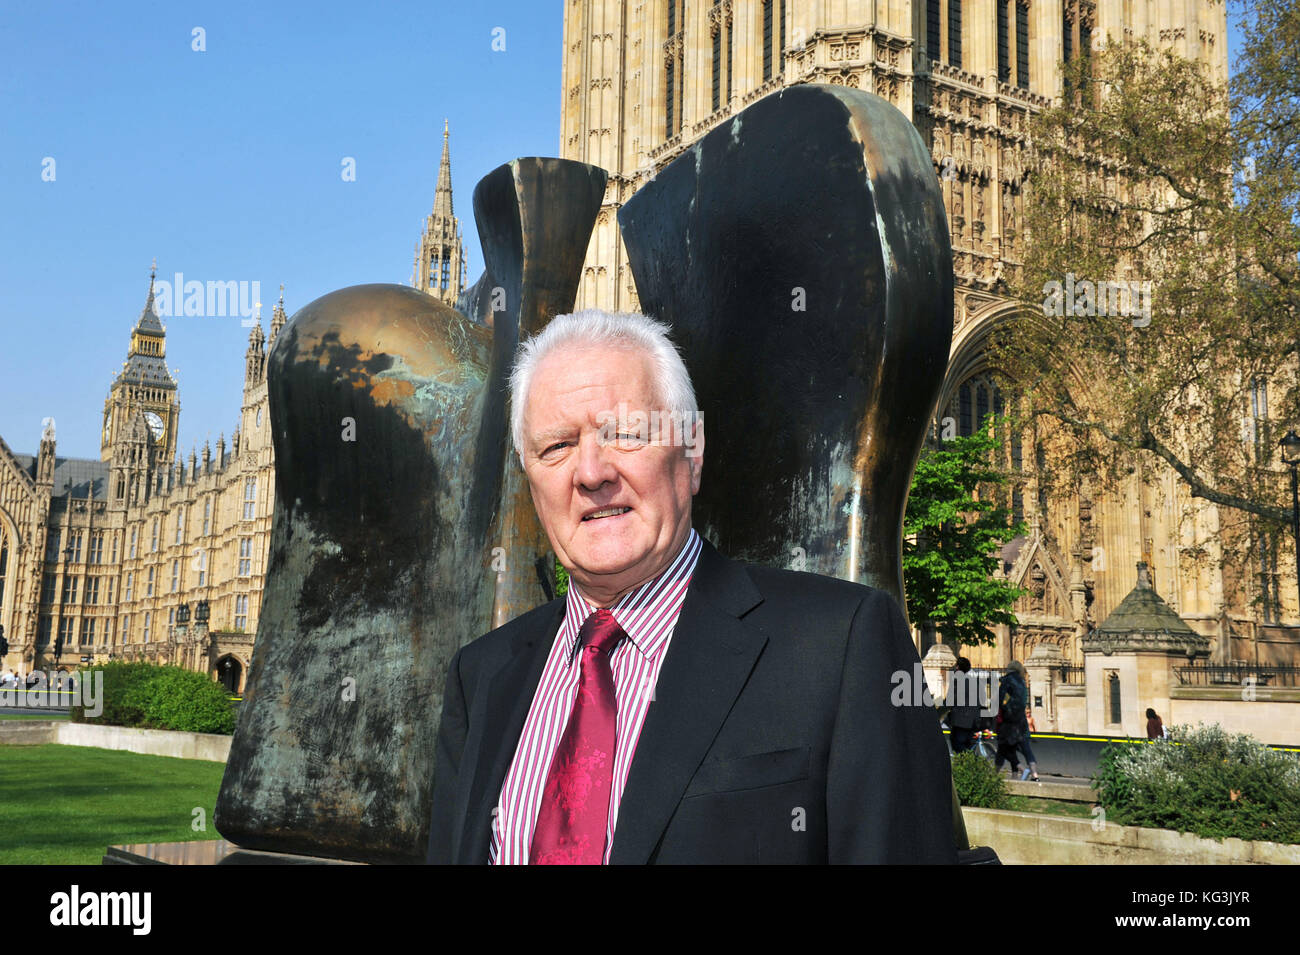 John Francis McFall, Baron McFall of Alcluith PC is a British politician, who currently serves as the Senior Deputy Speaker of the House of Lords. Stock Photo